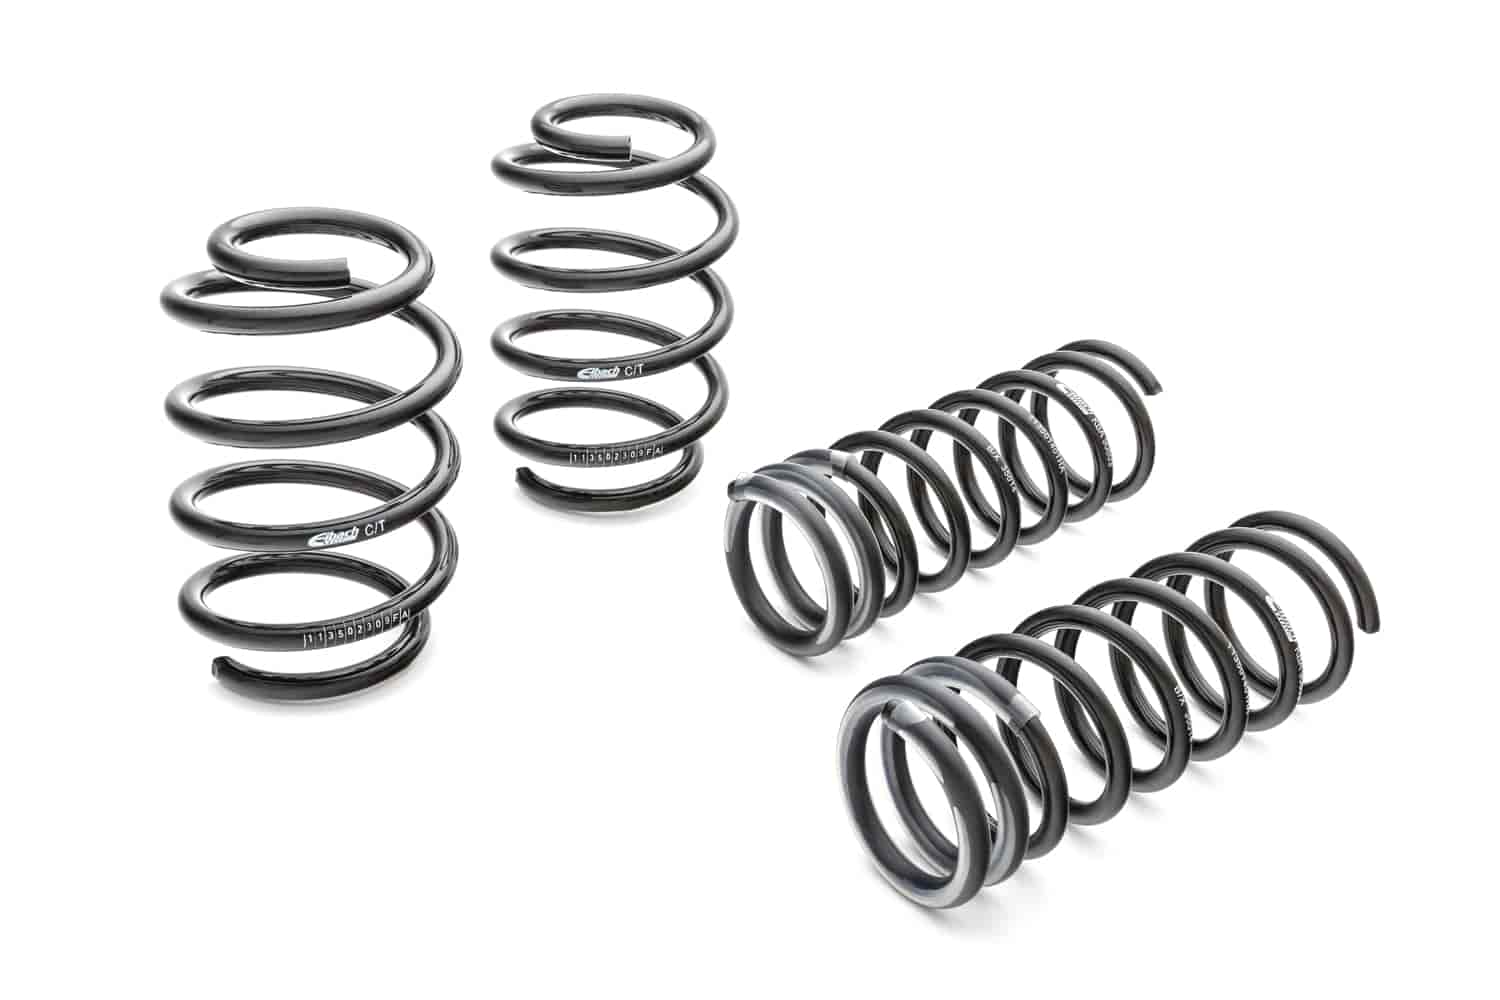 8561.140 Pro-Kit Lowering Springs 1999-2006 Golf 4-cyl. - 1.200 in. Front/Rear Drop